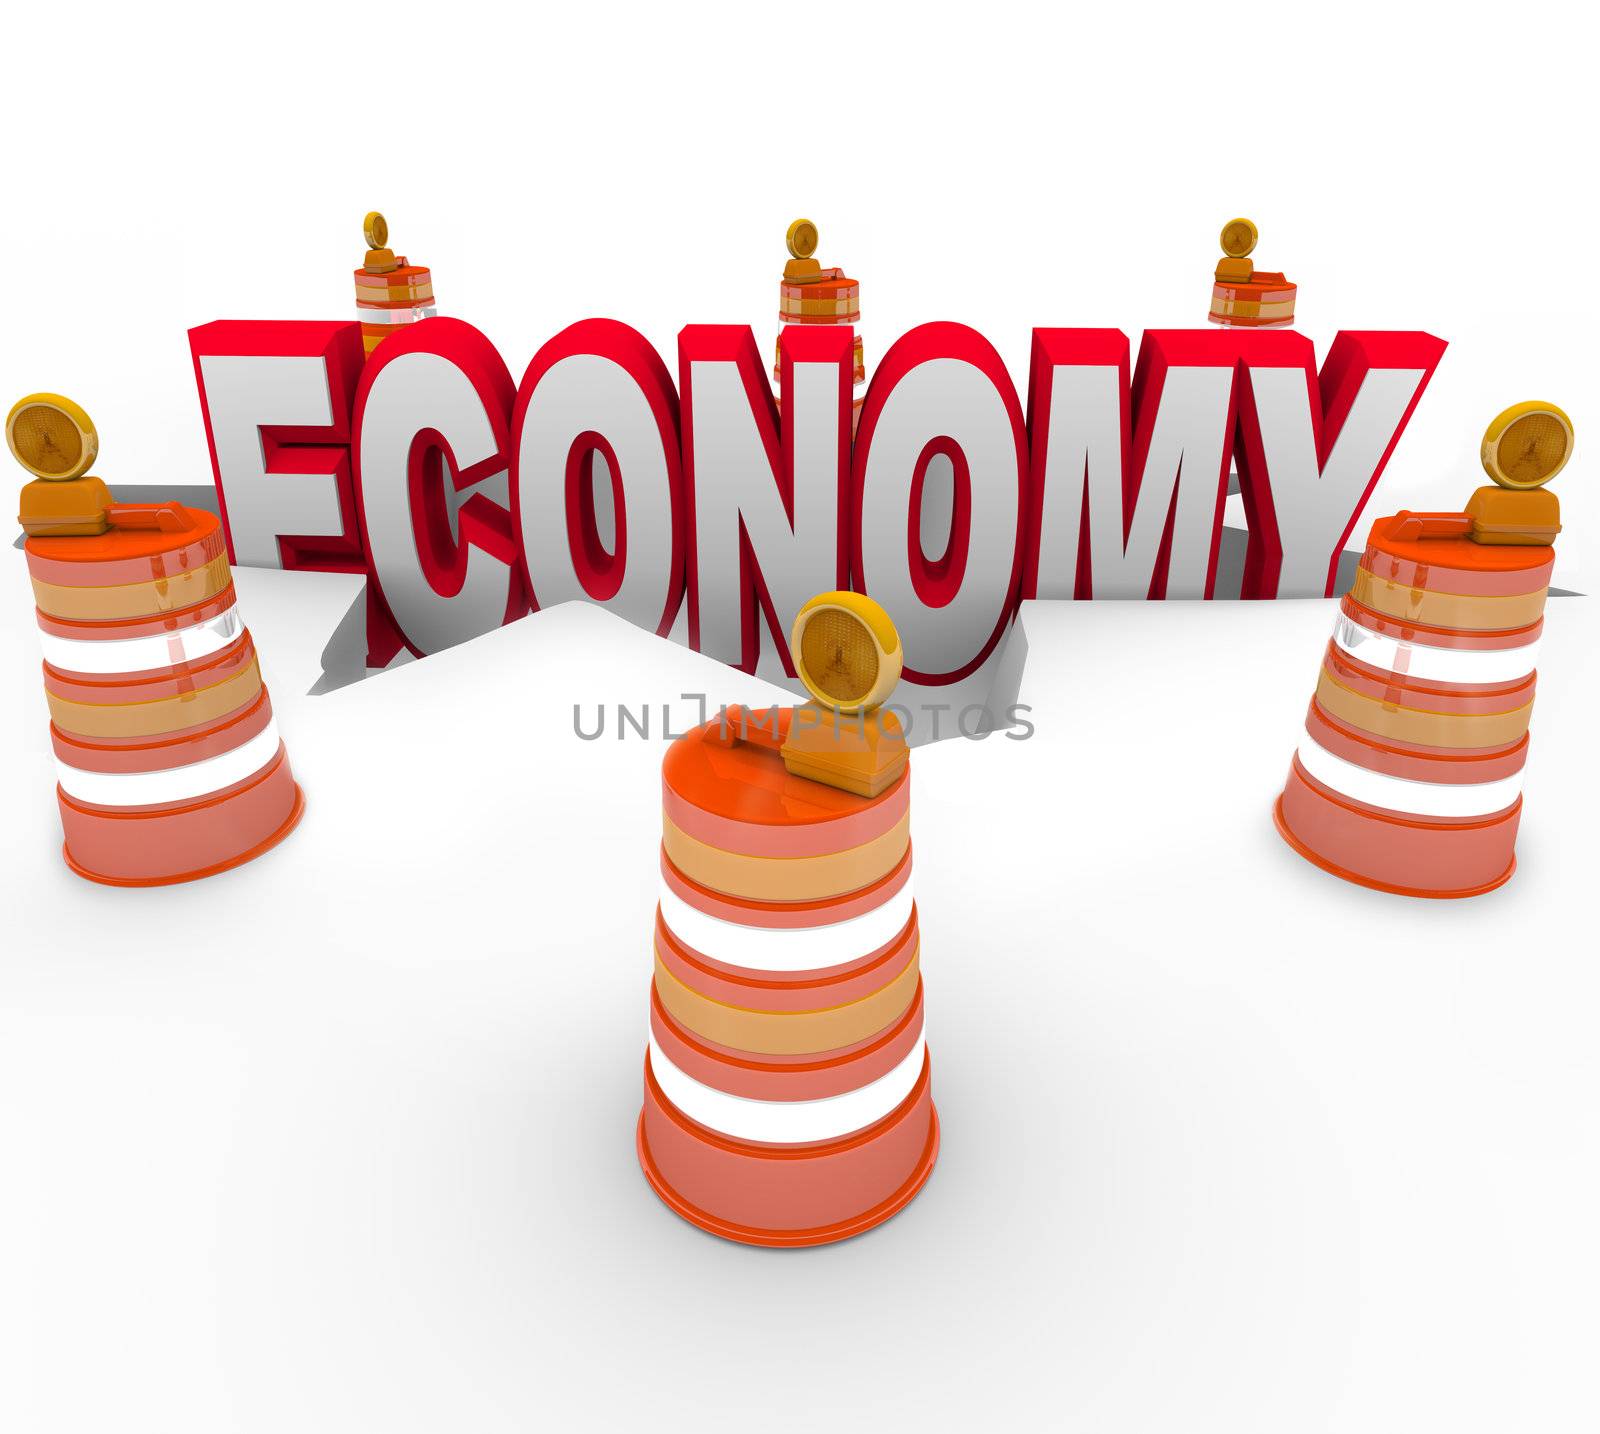 The word Economy falling into a hole symbolizing the financial meltdown that is causing a recession or depression on a global scale